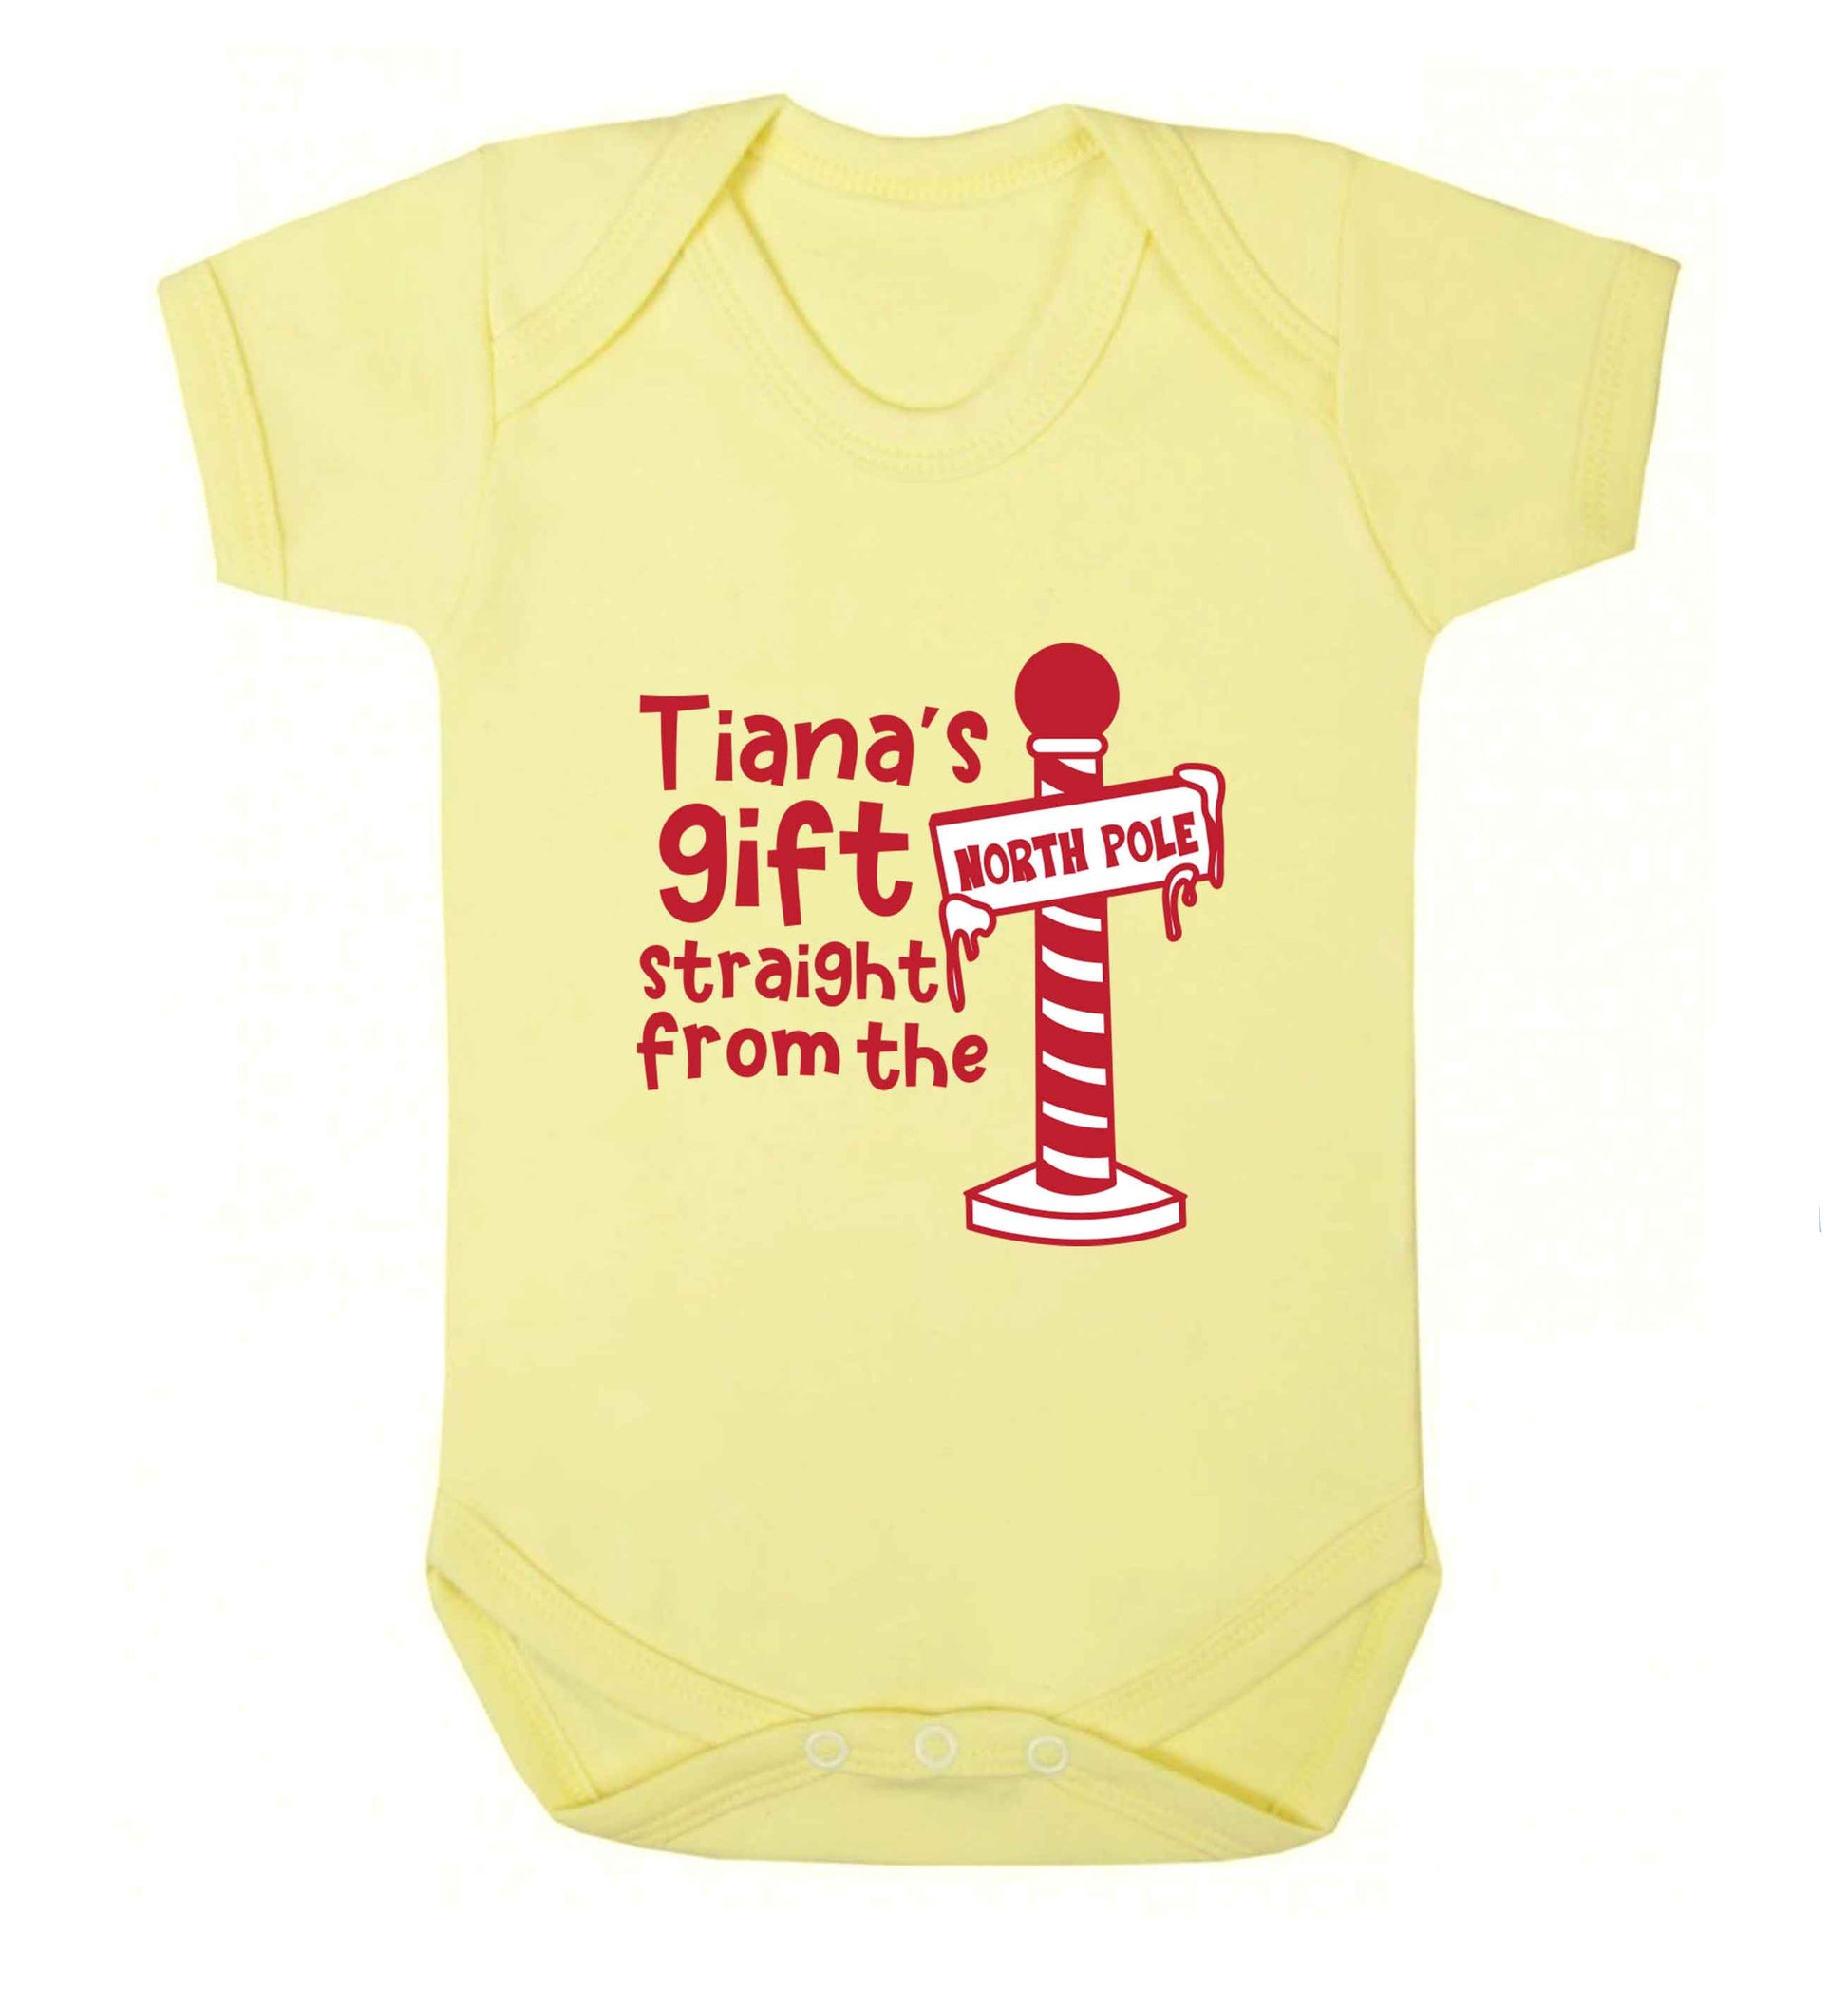 Merry Christmas baby vest pale yellow 18-24 months